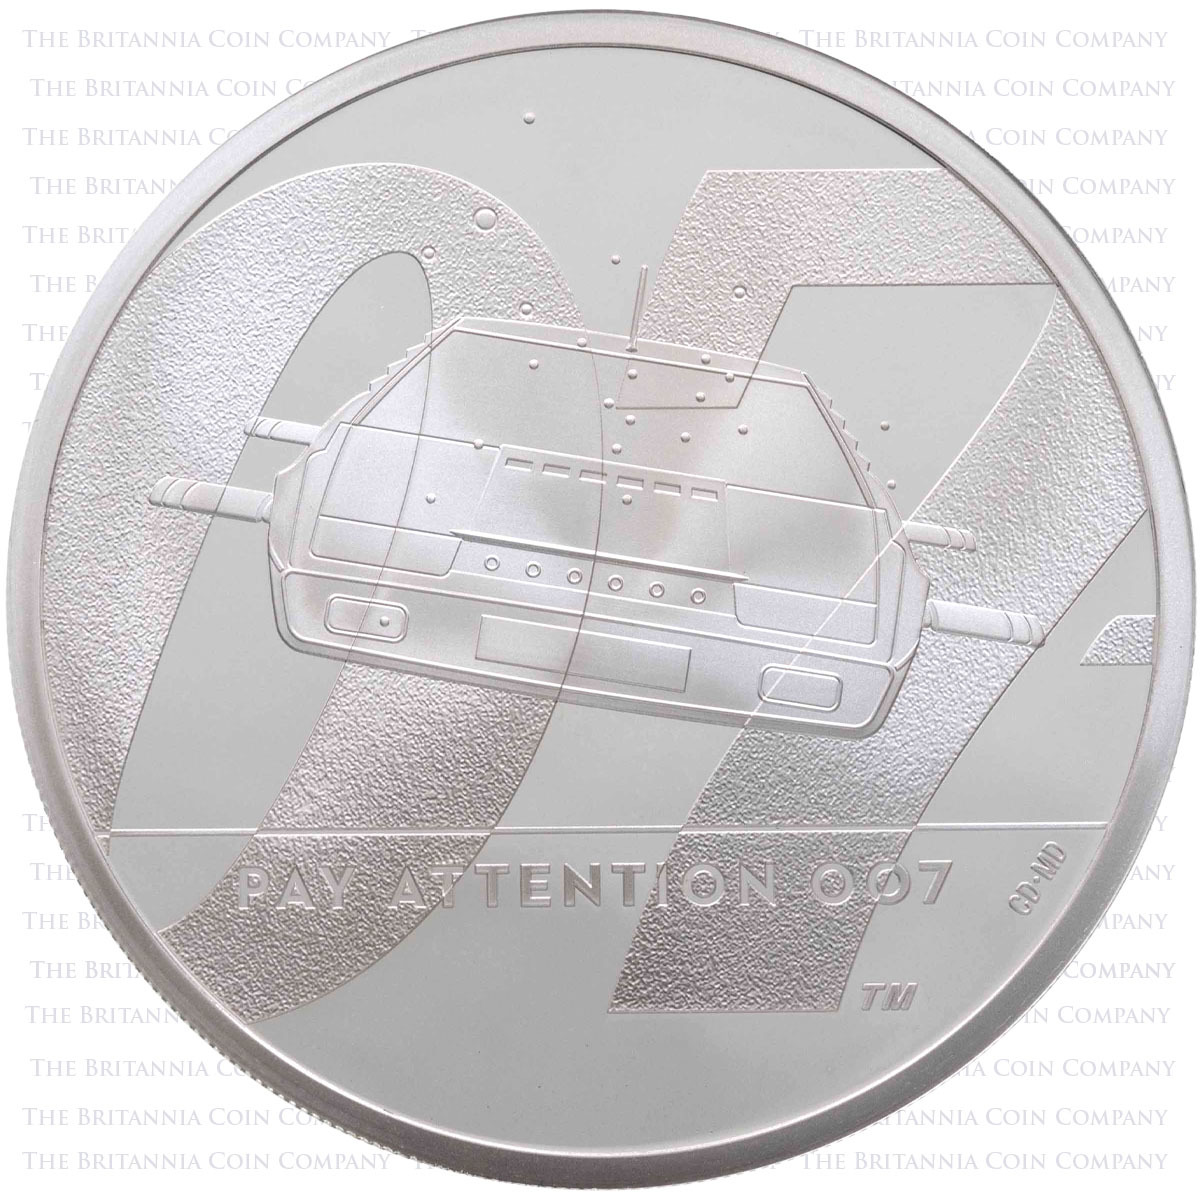 UK20B2SP 2020 Pay Attention James Bond 007 One Ounce Silver Proof Coin Reverse